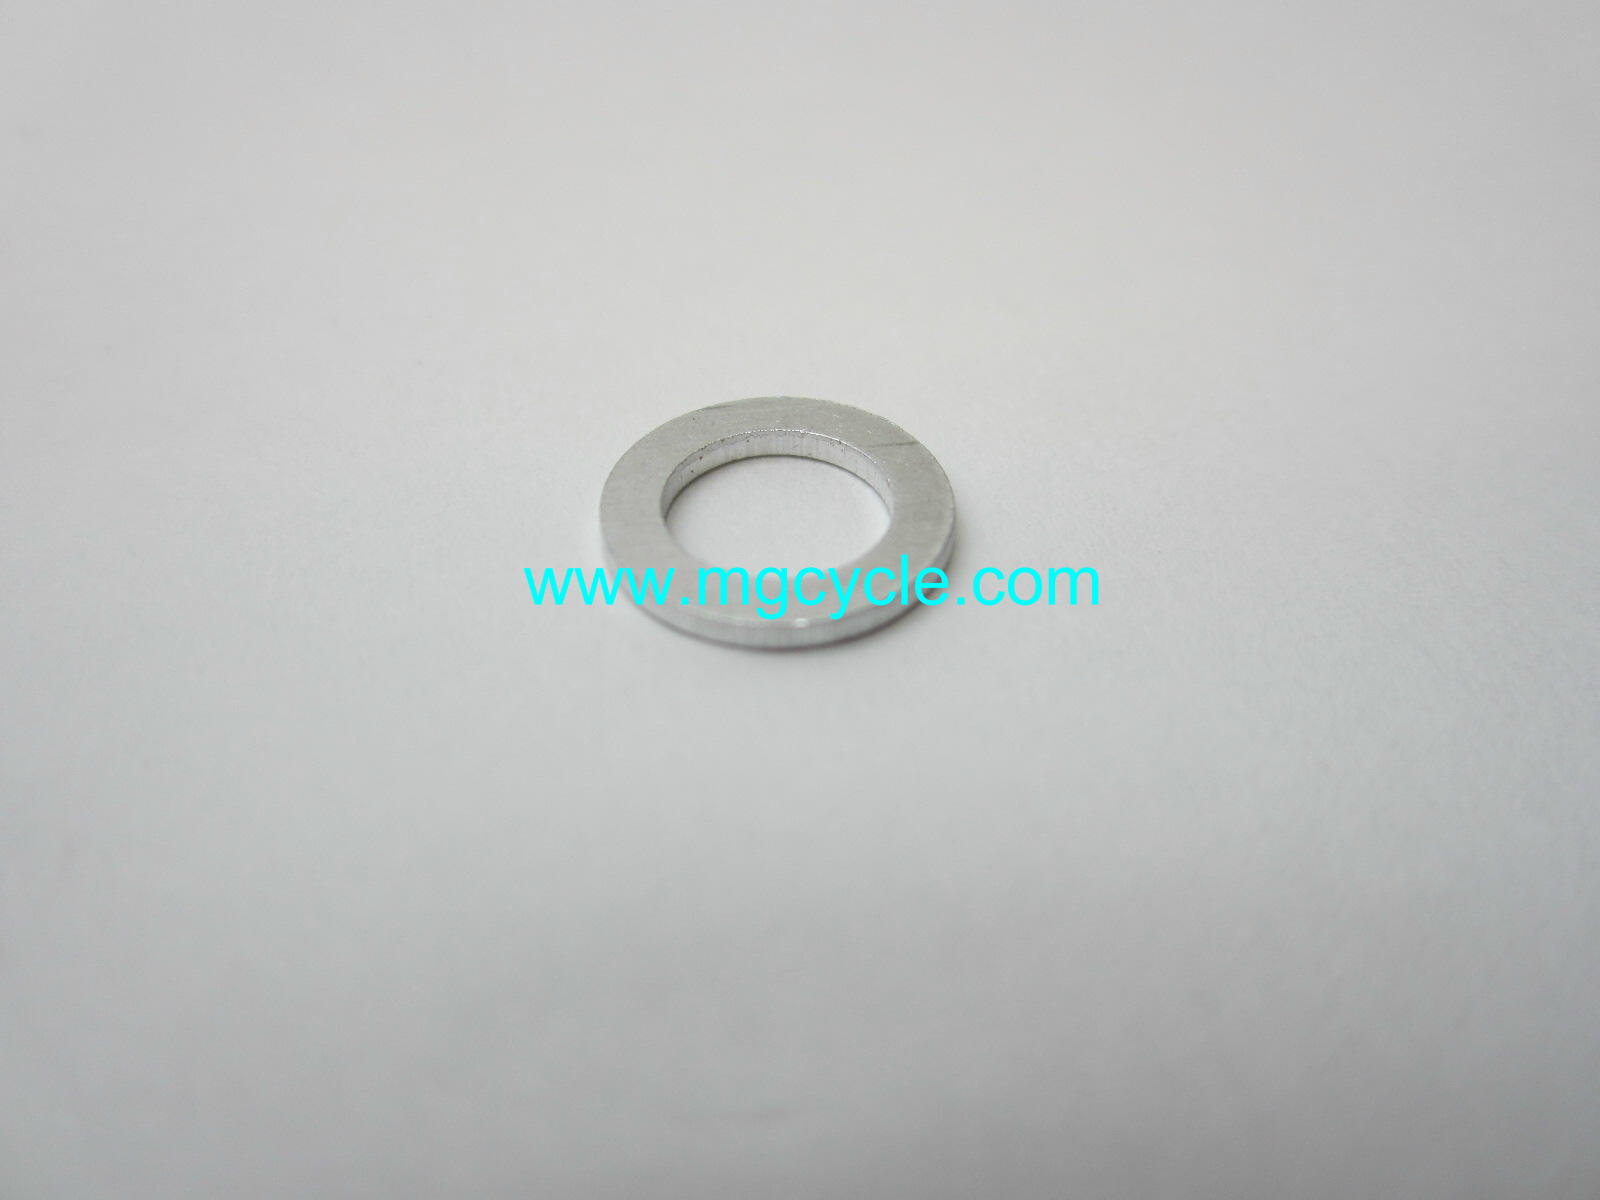 Aluminum sealing washer 6mm fork drain, fuel inlet etc 6x10